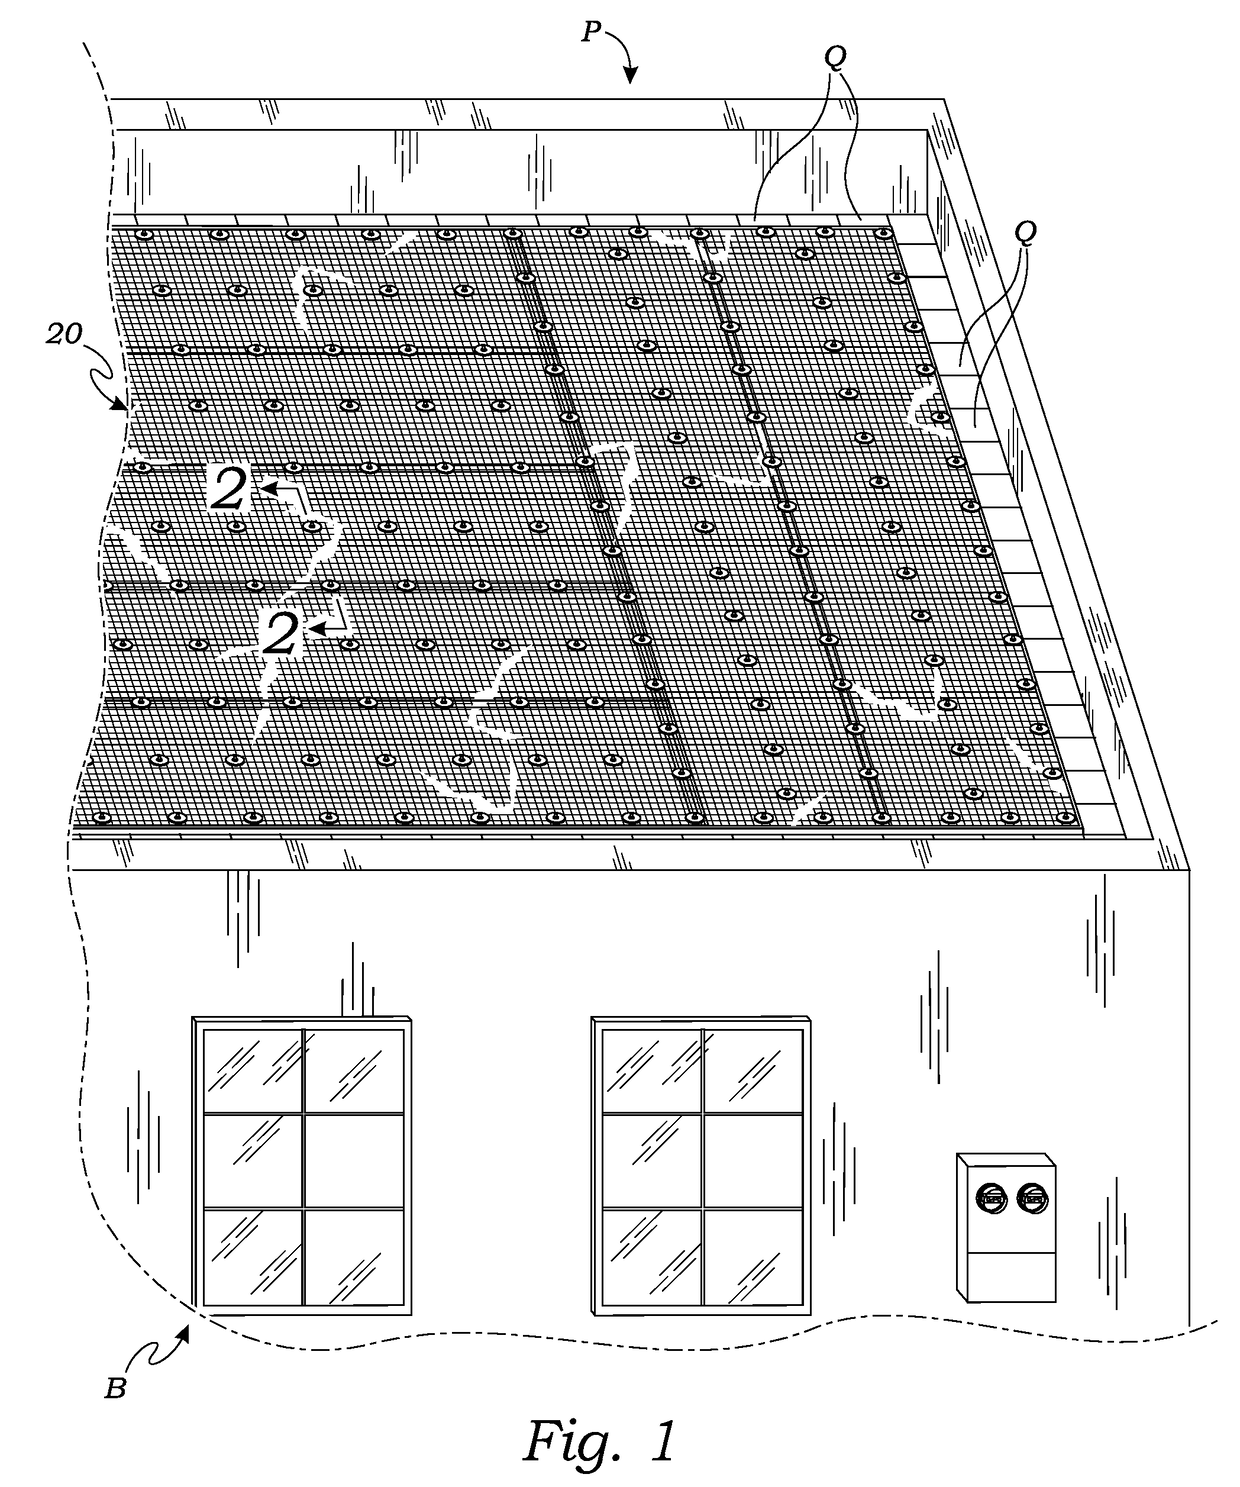 Protected membrane roof system